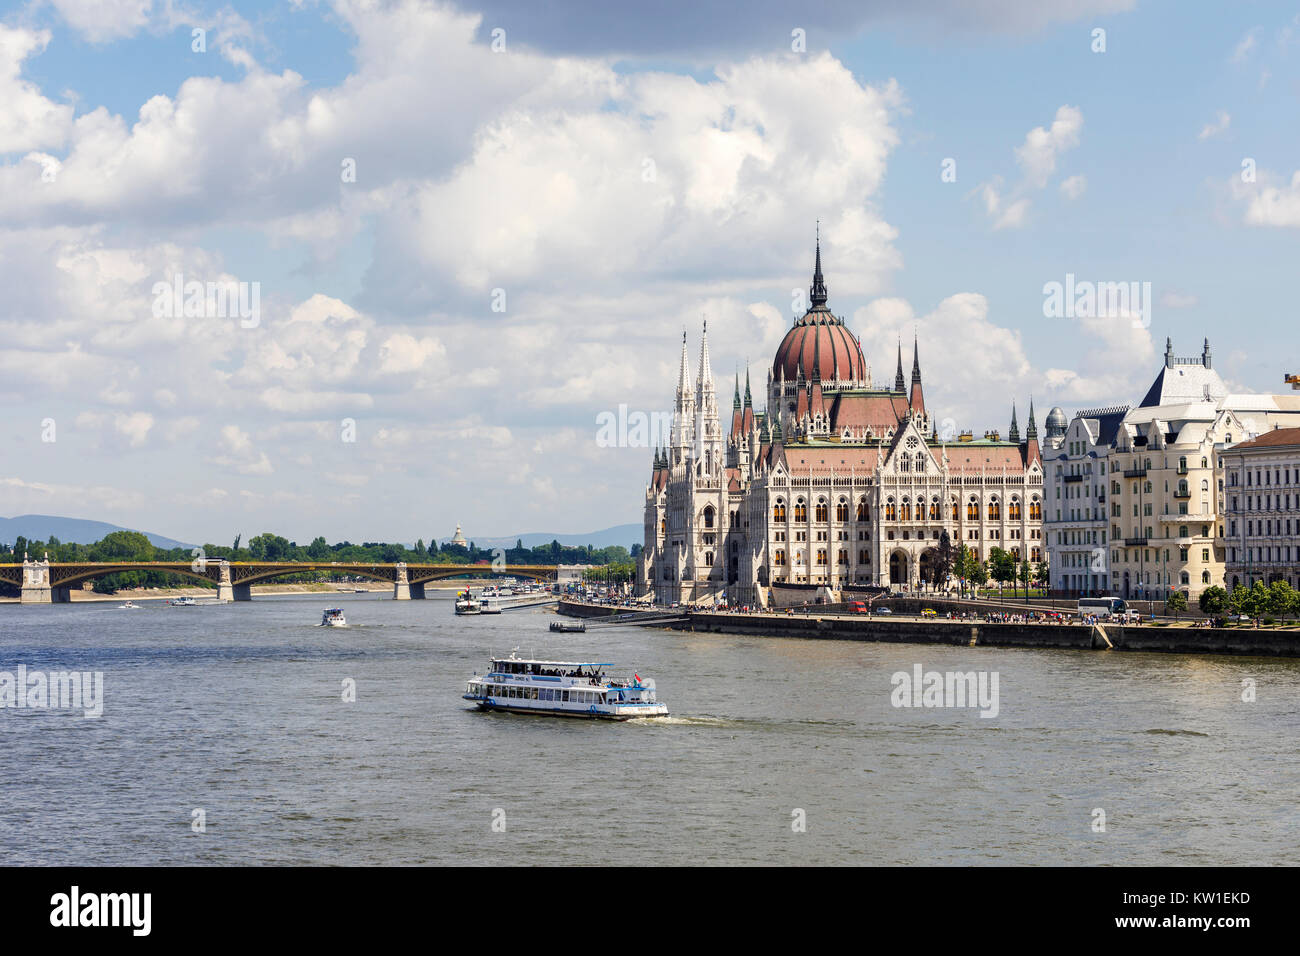 Cruise boat, Hungarian Parliament Building in Pest on the banks of the River Danube and Margaret Bridge, view from Buda, Budapest, capital of Hungary Stock Photo